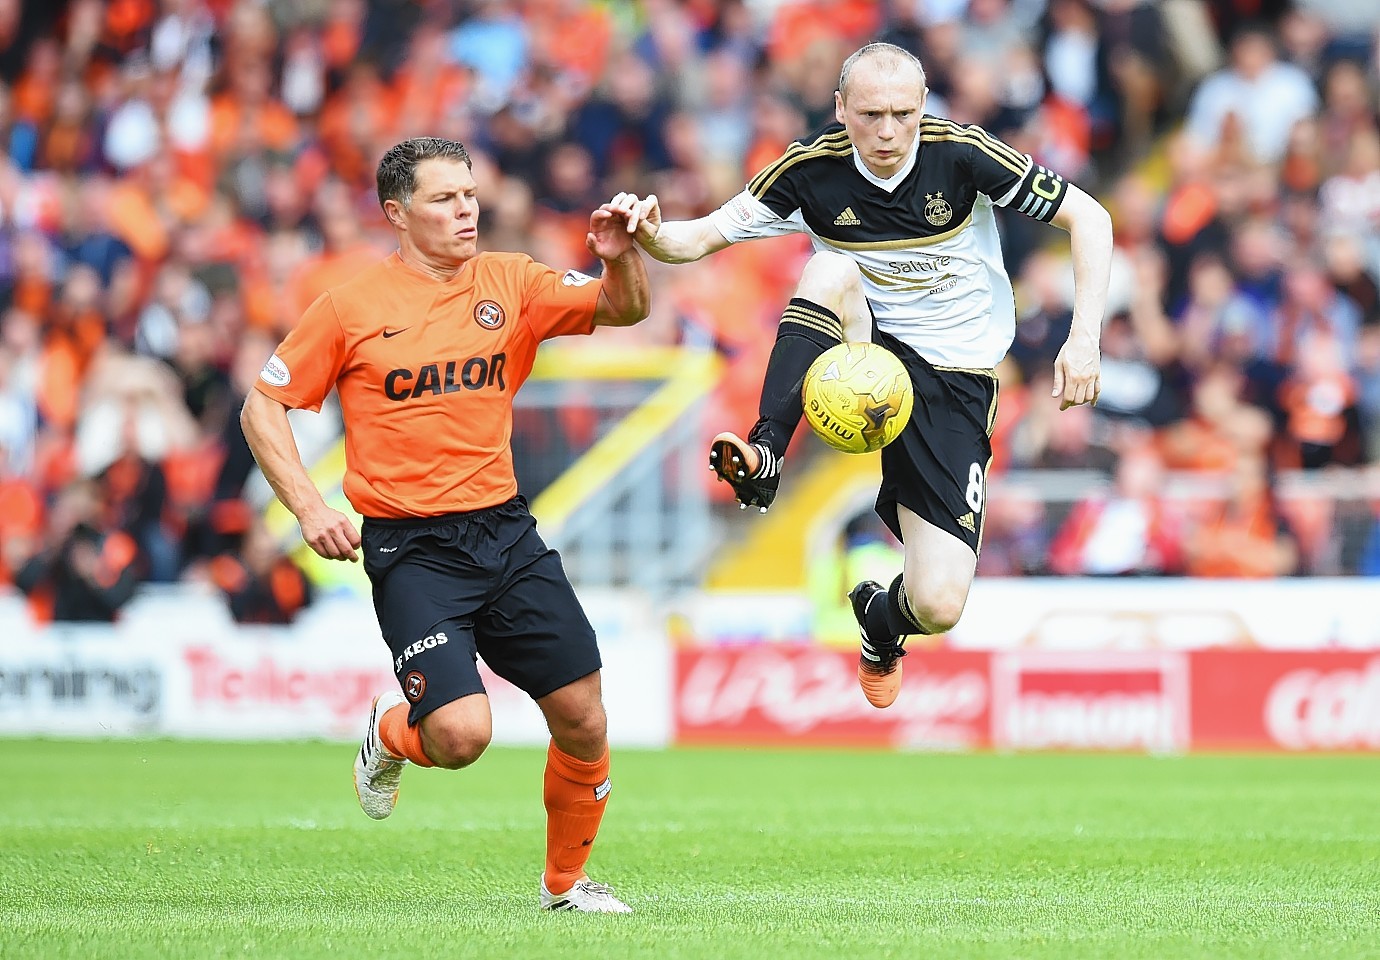 Will Flood could be set for a return to Dundee United